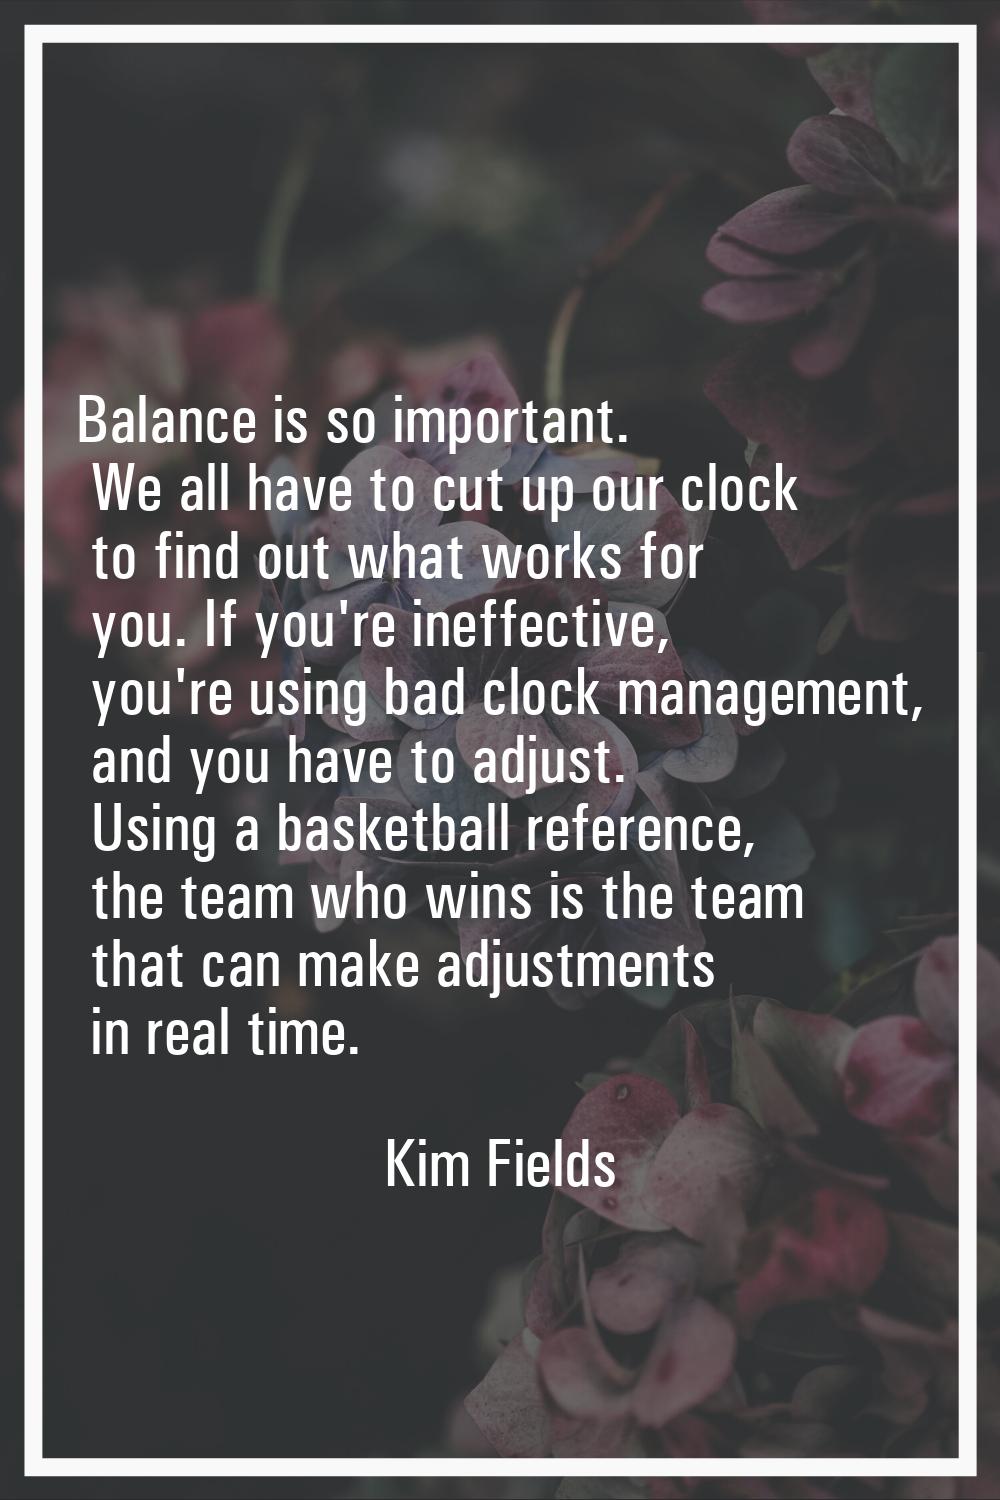 Balance is so important. We all have to cut up our clock to find out what works for you. If you're 